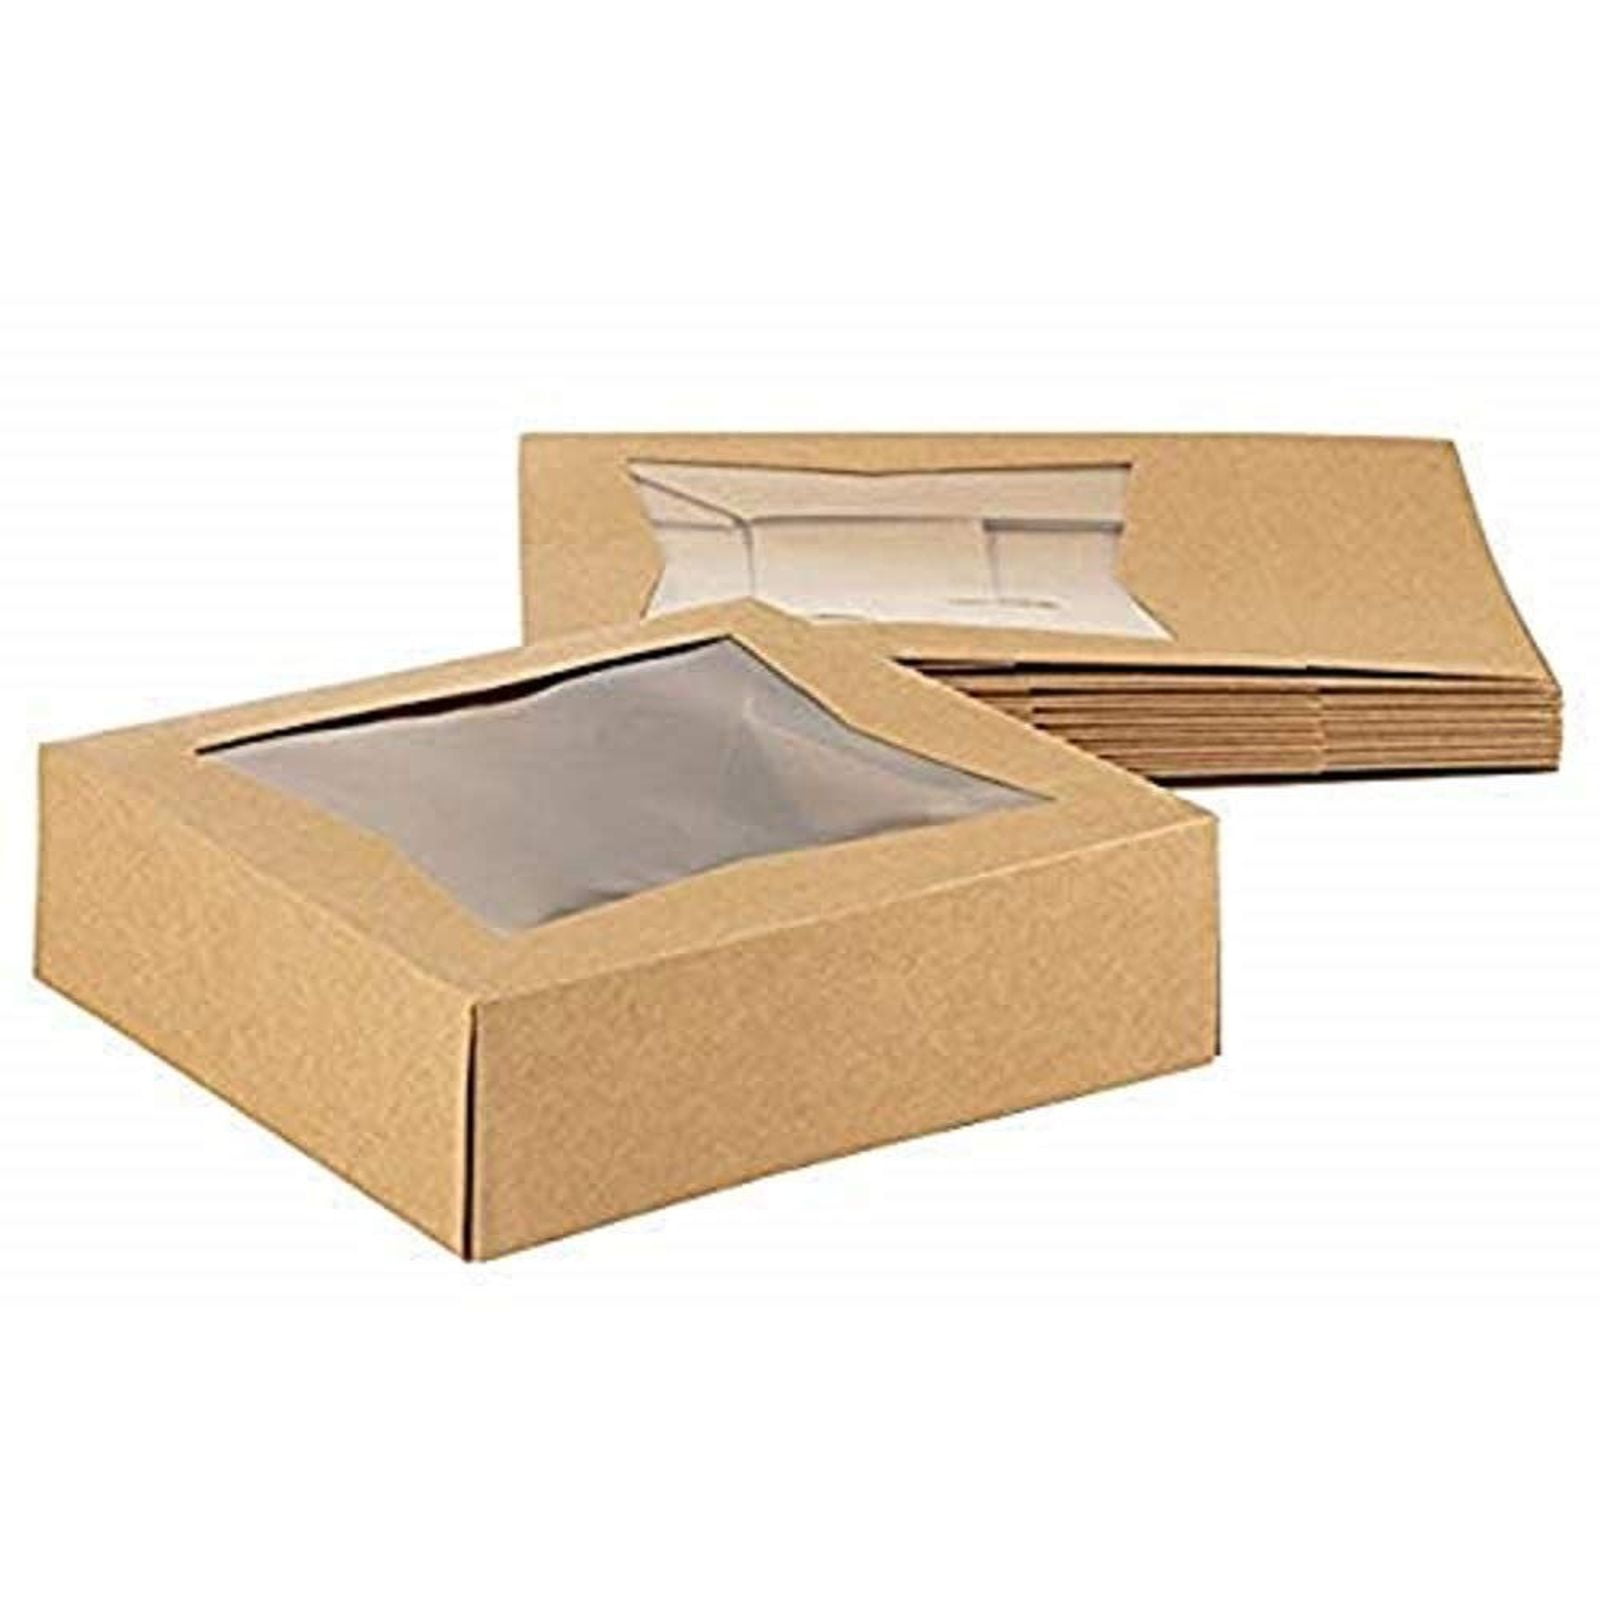 Storage Box for Chocolates White Kraft Box 20 Pack 19 x 11 x 4.5 cm Party - Cupcake Boxes Gifts Festivals & Wedding Occasions Pie/Bakery Box - Flat Pack Presentation Boxes